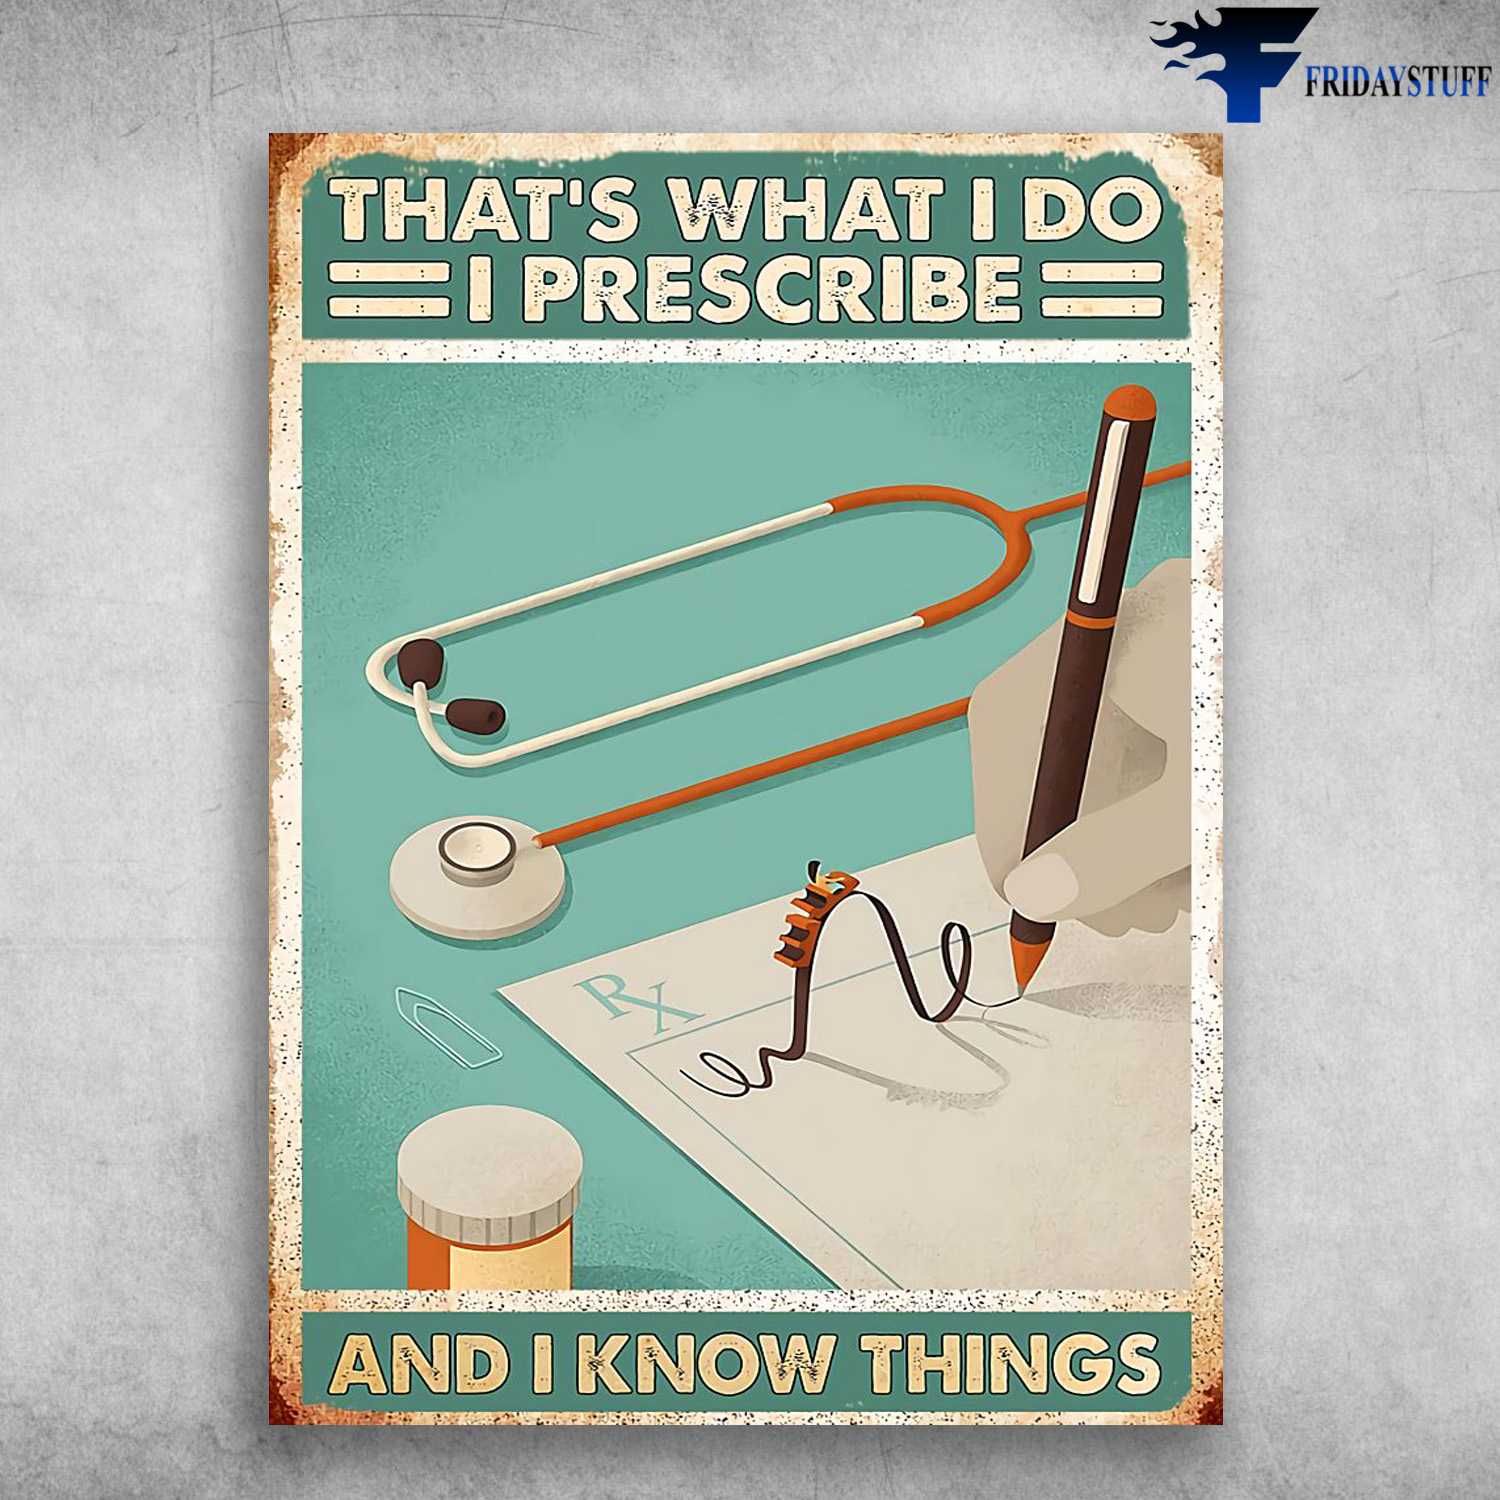 Pharmacist Poster, That's What I Do, I Prescribe, And I Know Things